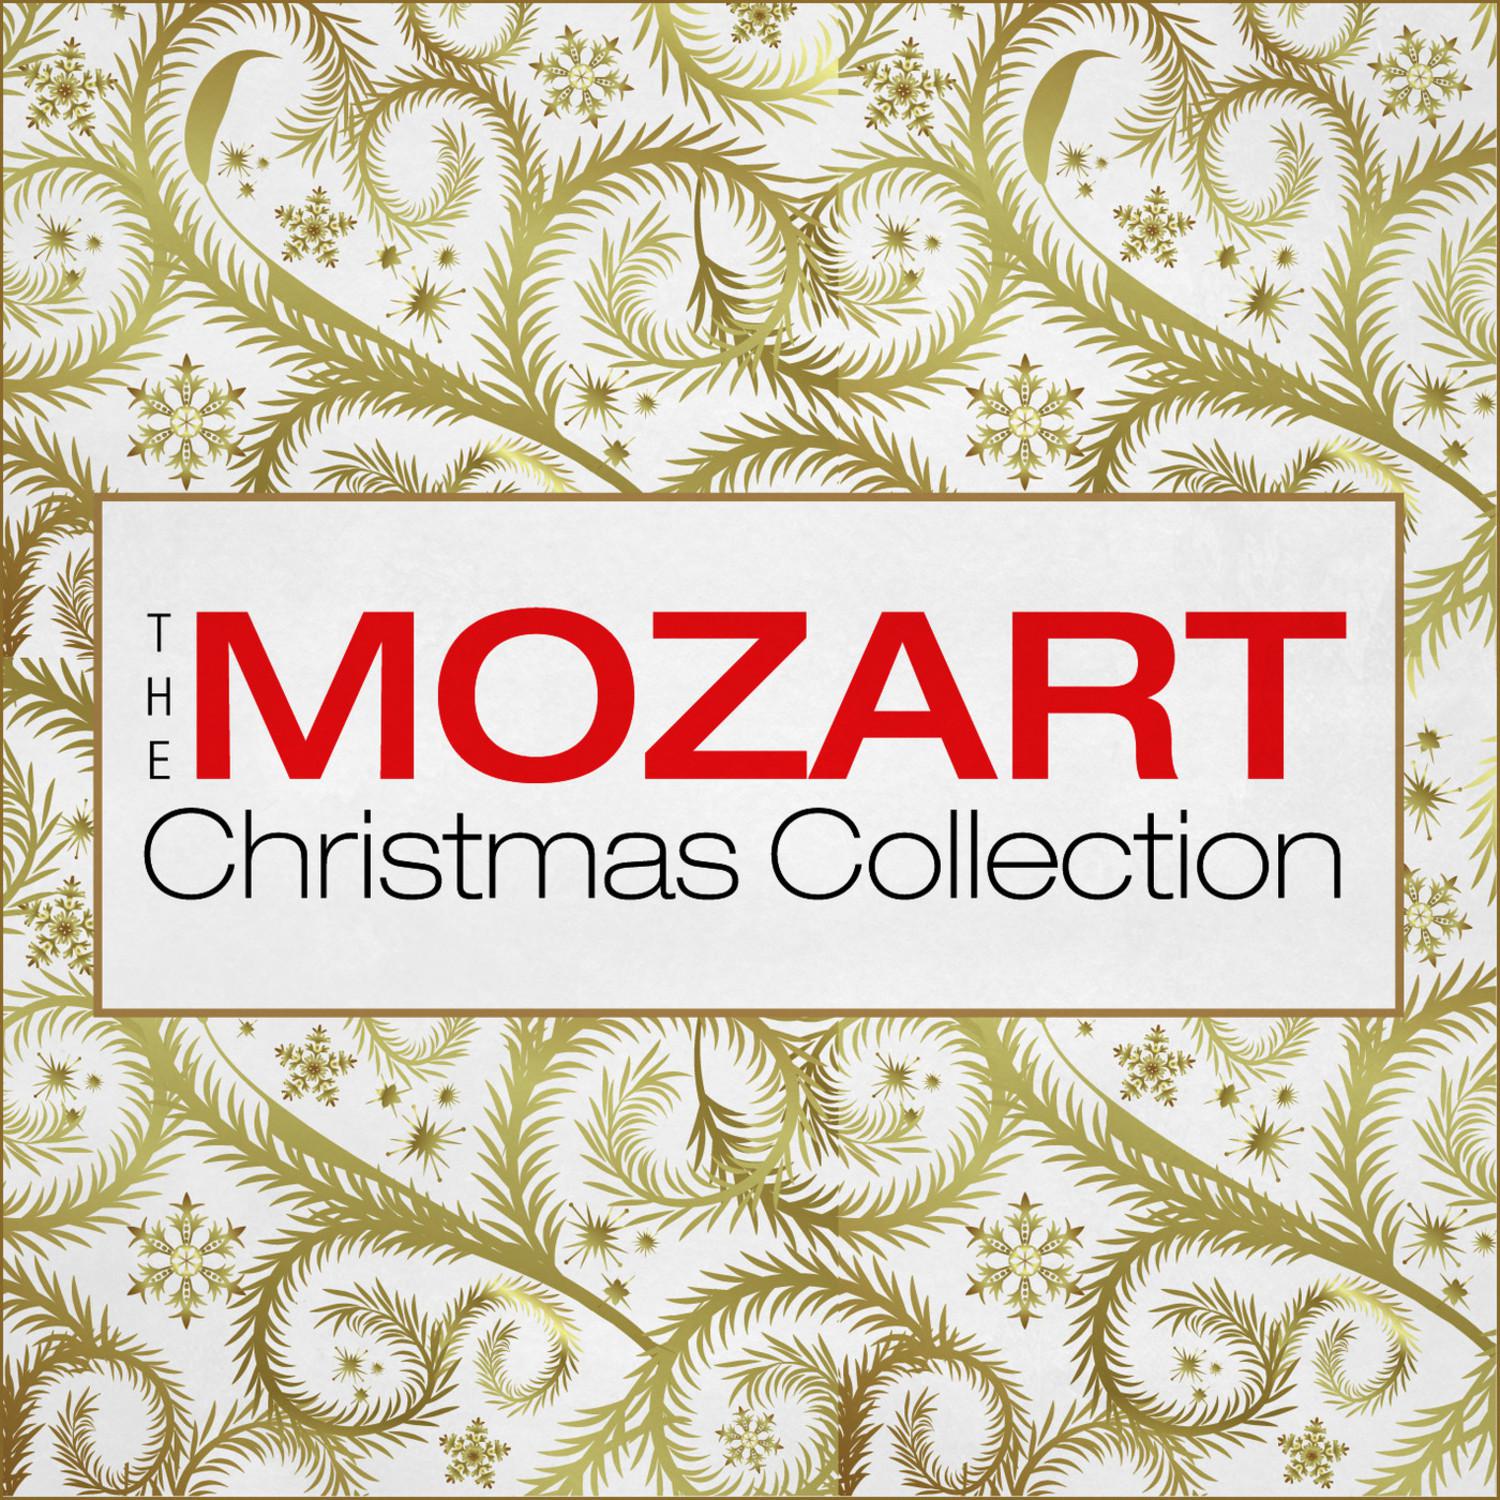 The Mozart Christmas Collection